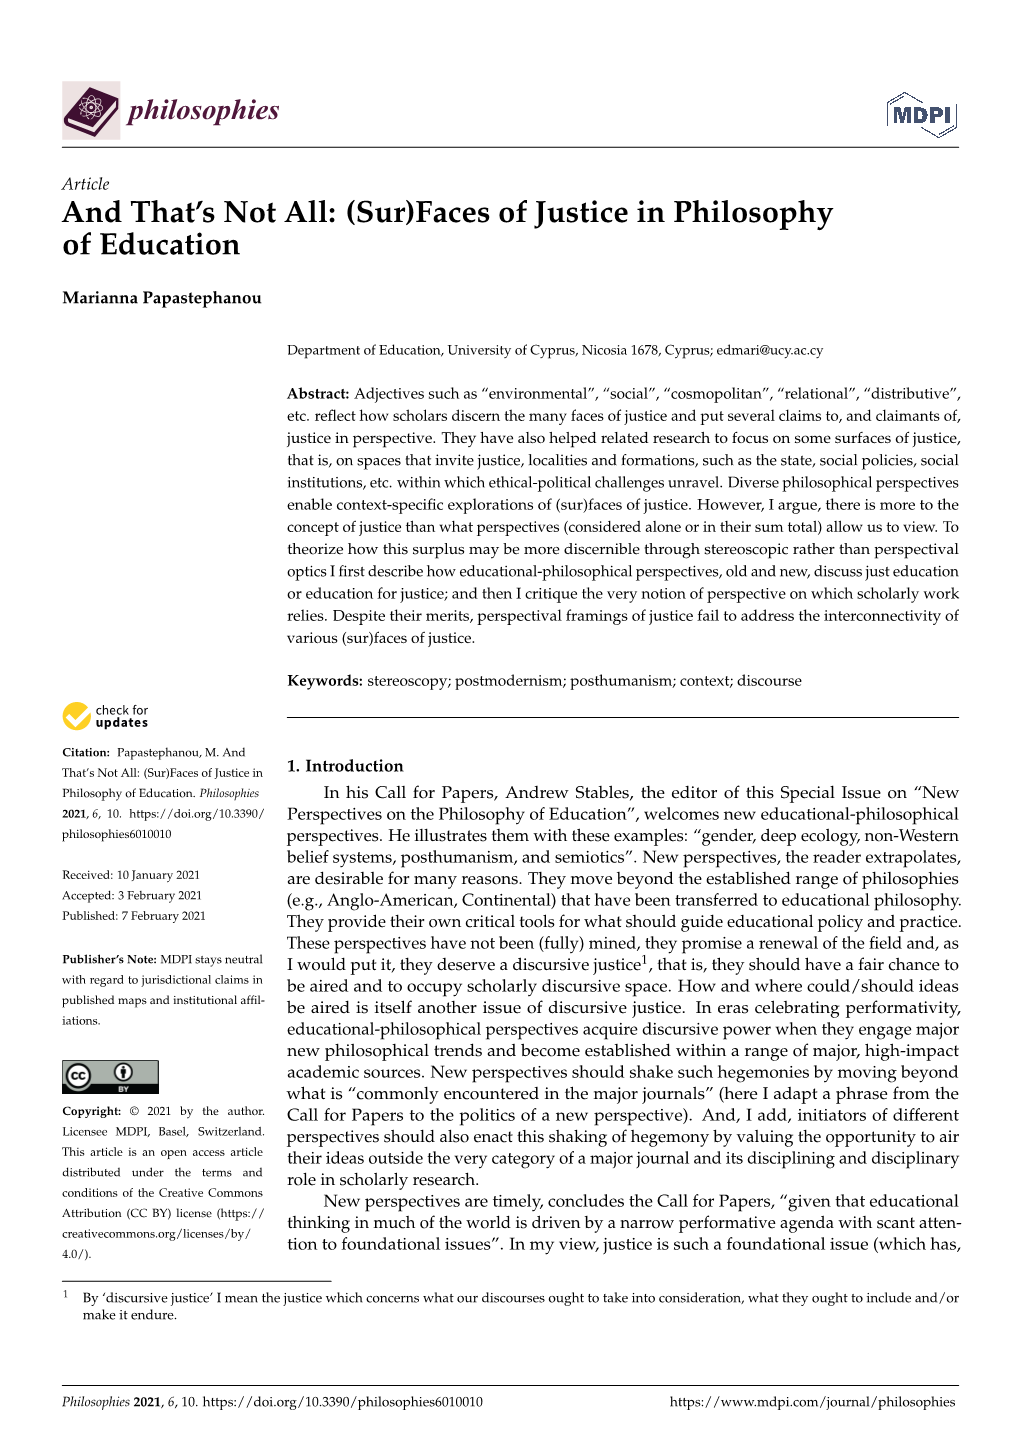 And That's Not All: (Sur)Faces of Justice in Philosophy of Education